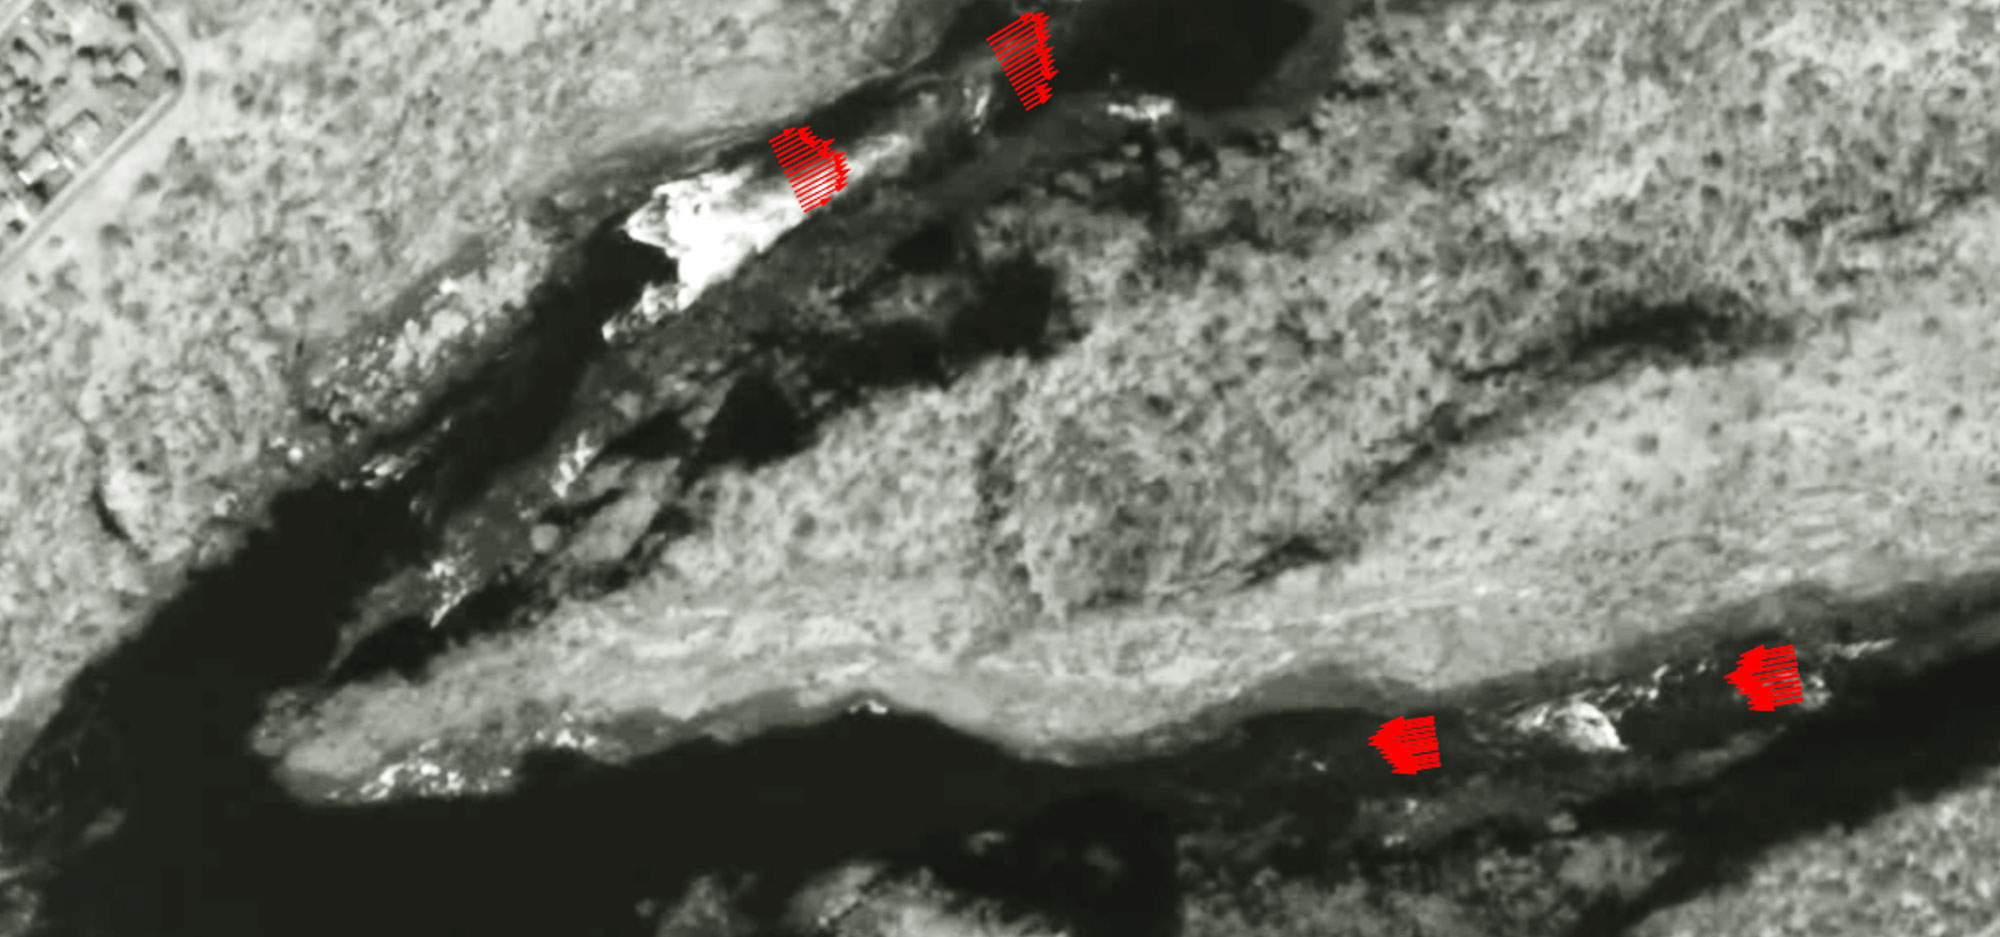 Satellite image showing water speeds plotted for four locations on the Zambezi River below Victoria Falls